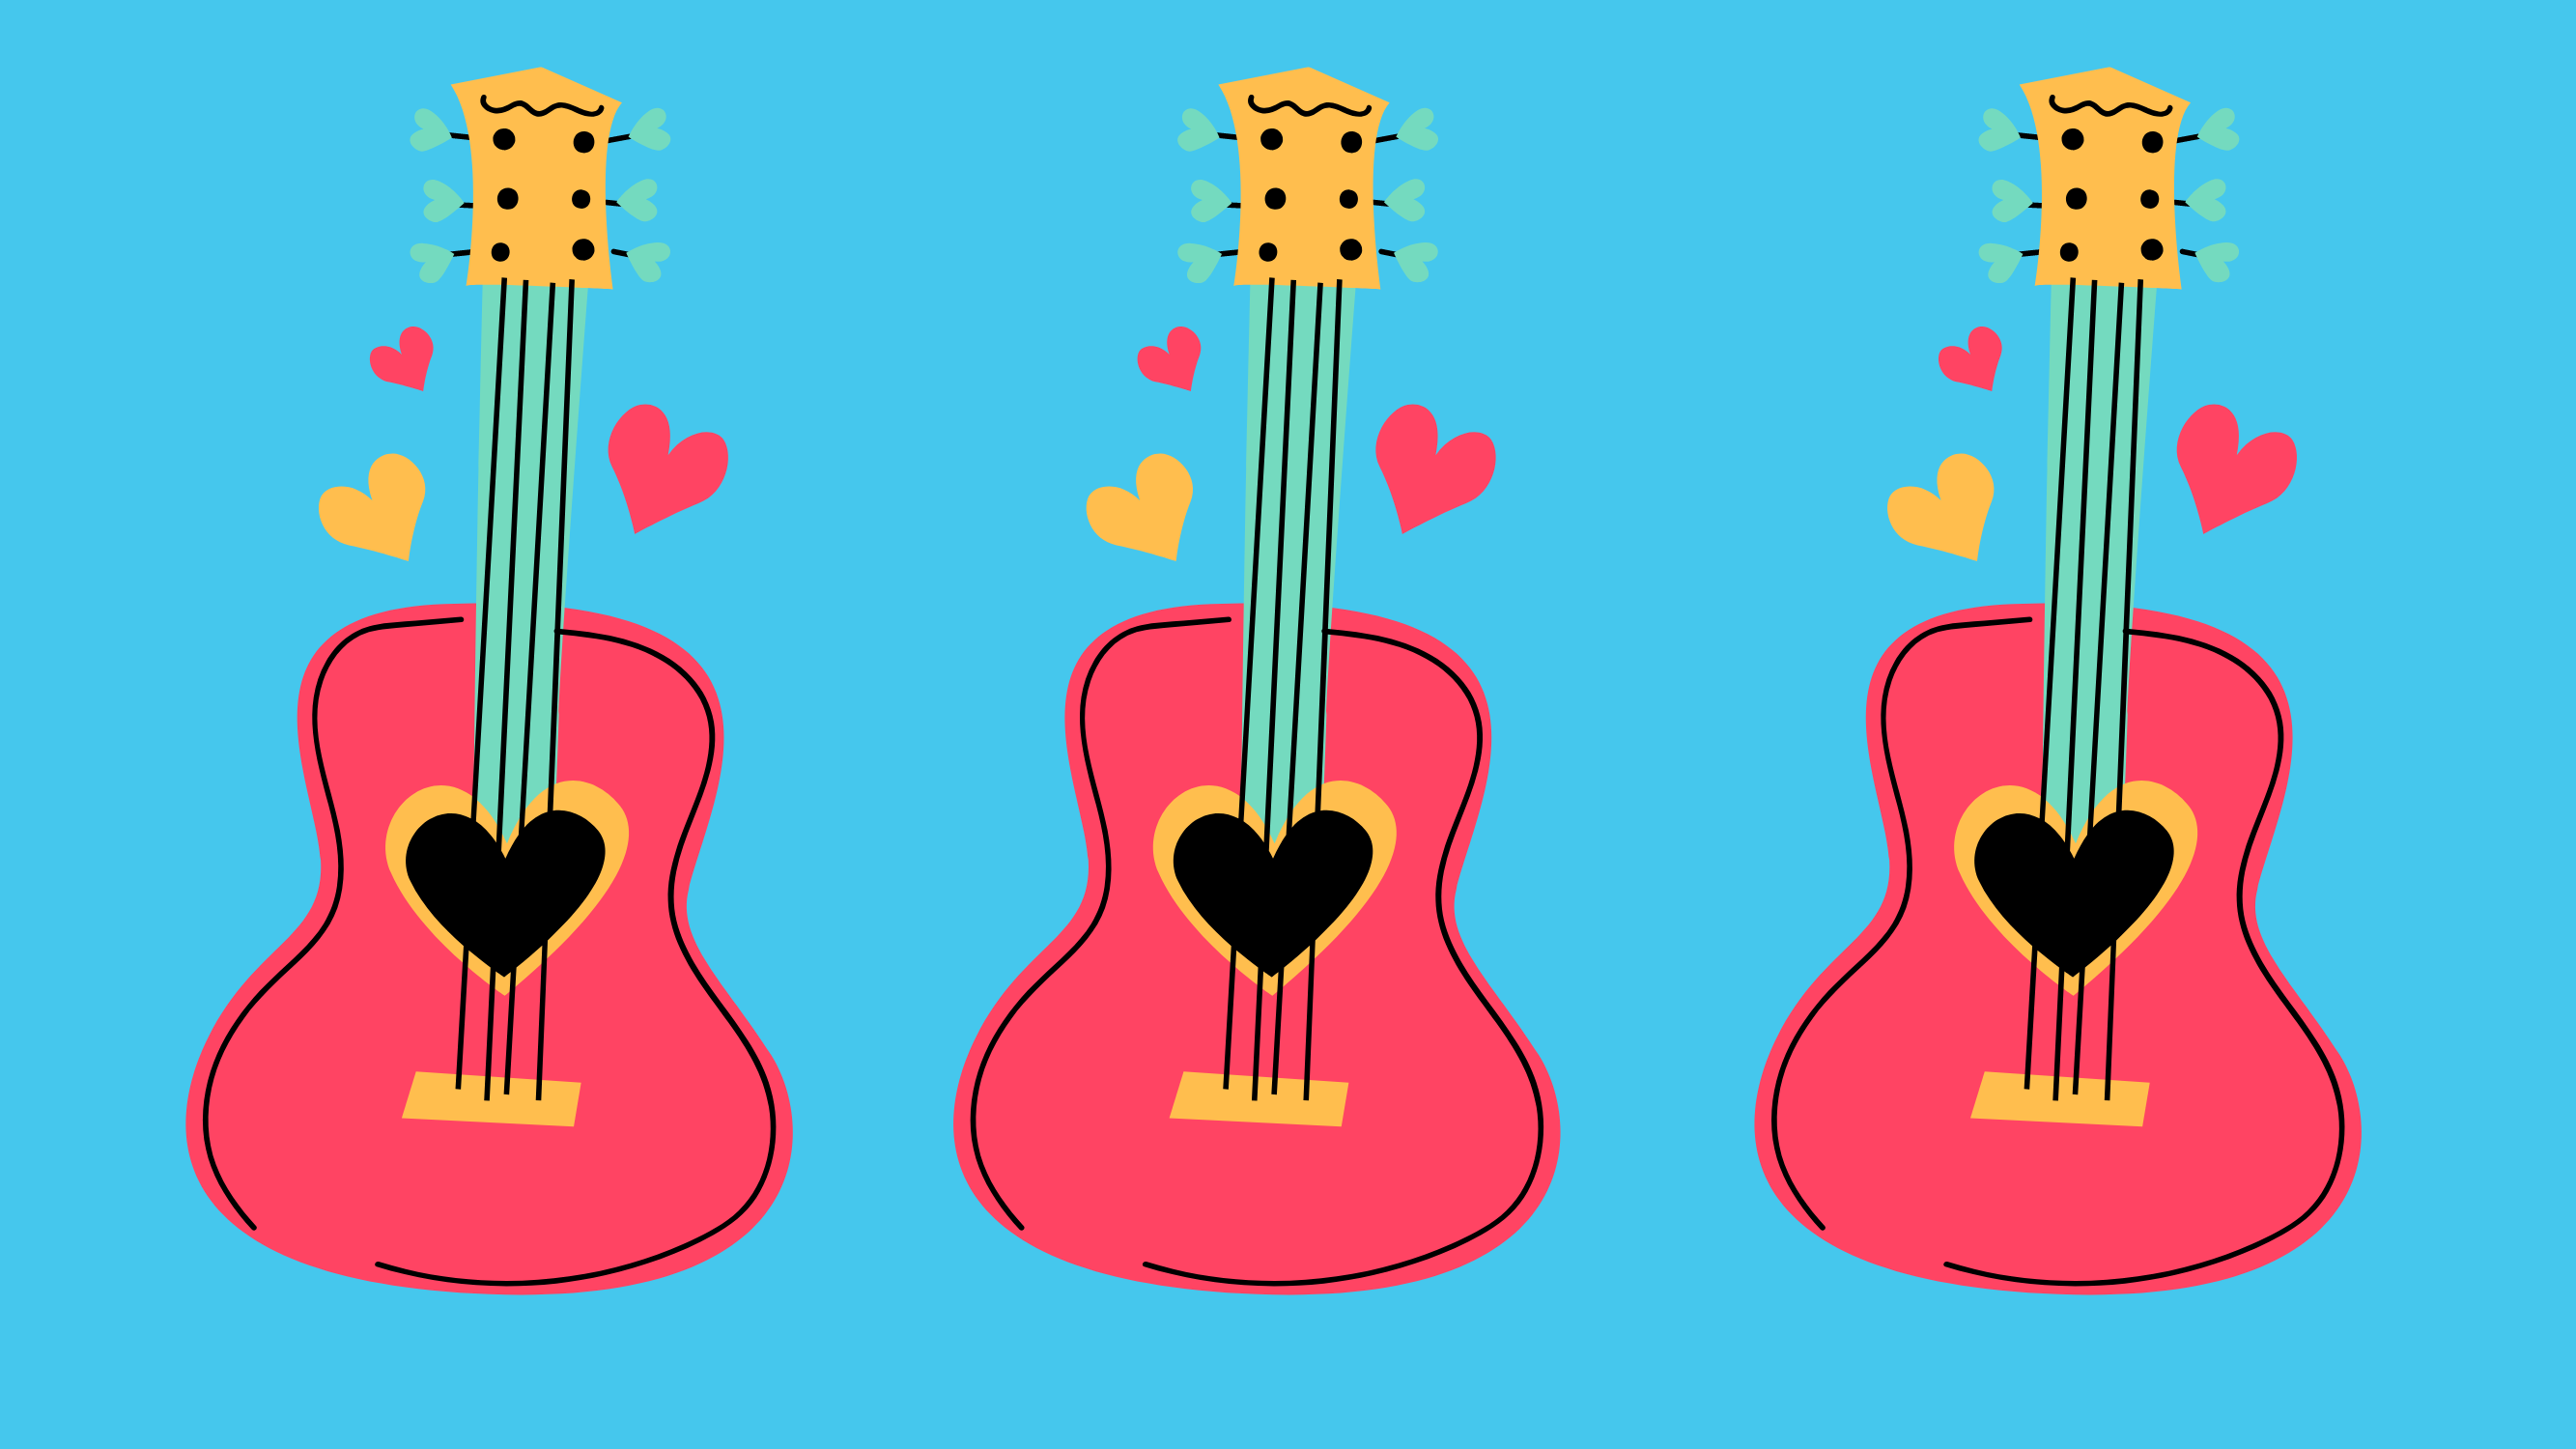 Three guitars with colorful background. 